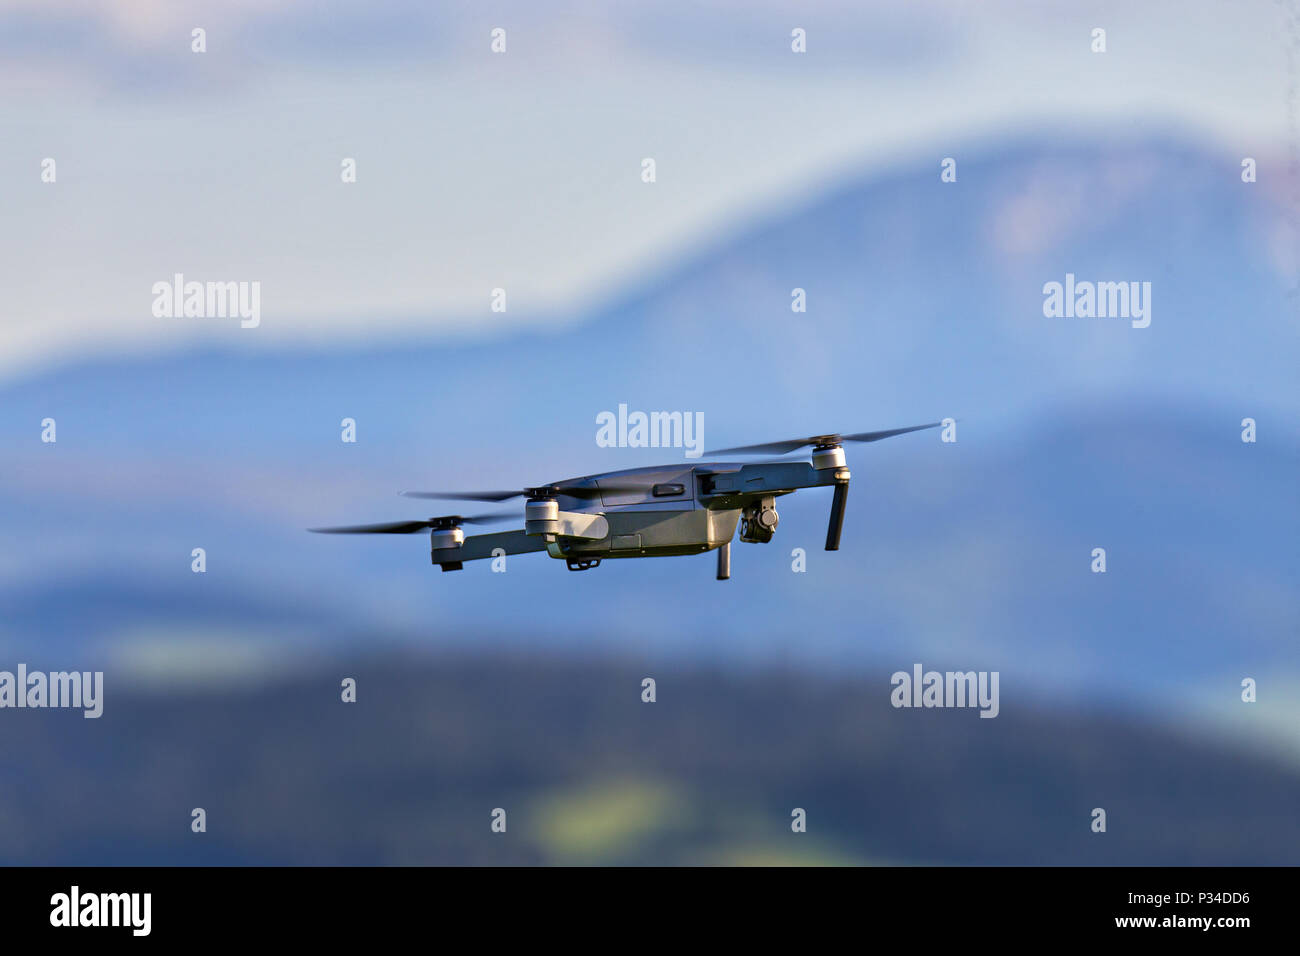 Drone with camera flying over mountain fields. Aerial photography and videography. Drone quad copter with high resolution digital camera in the air Stock Photo